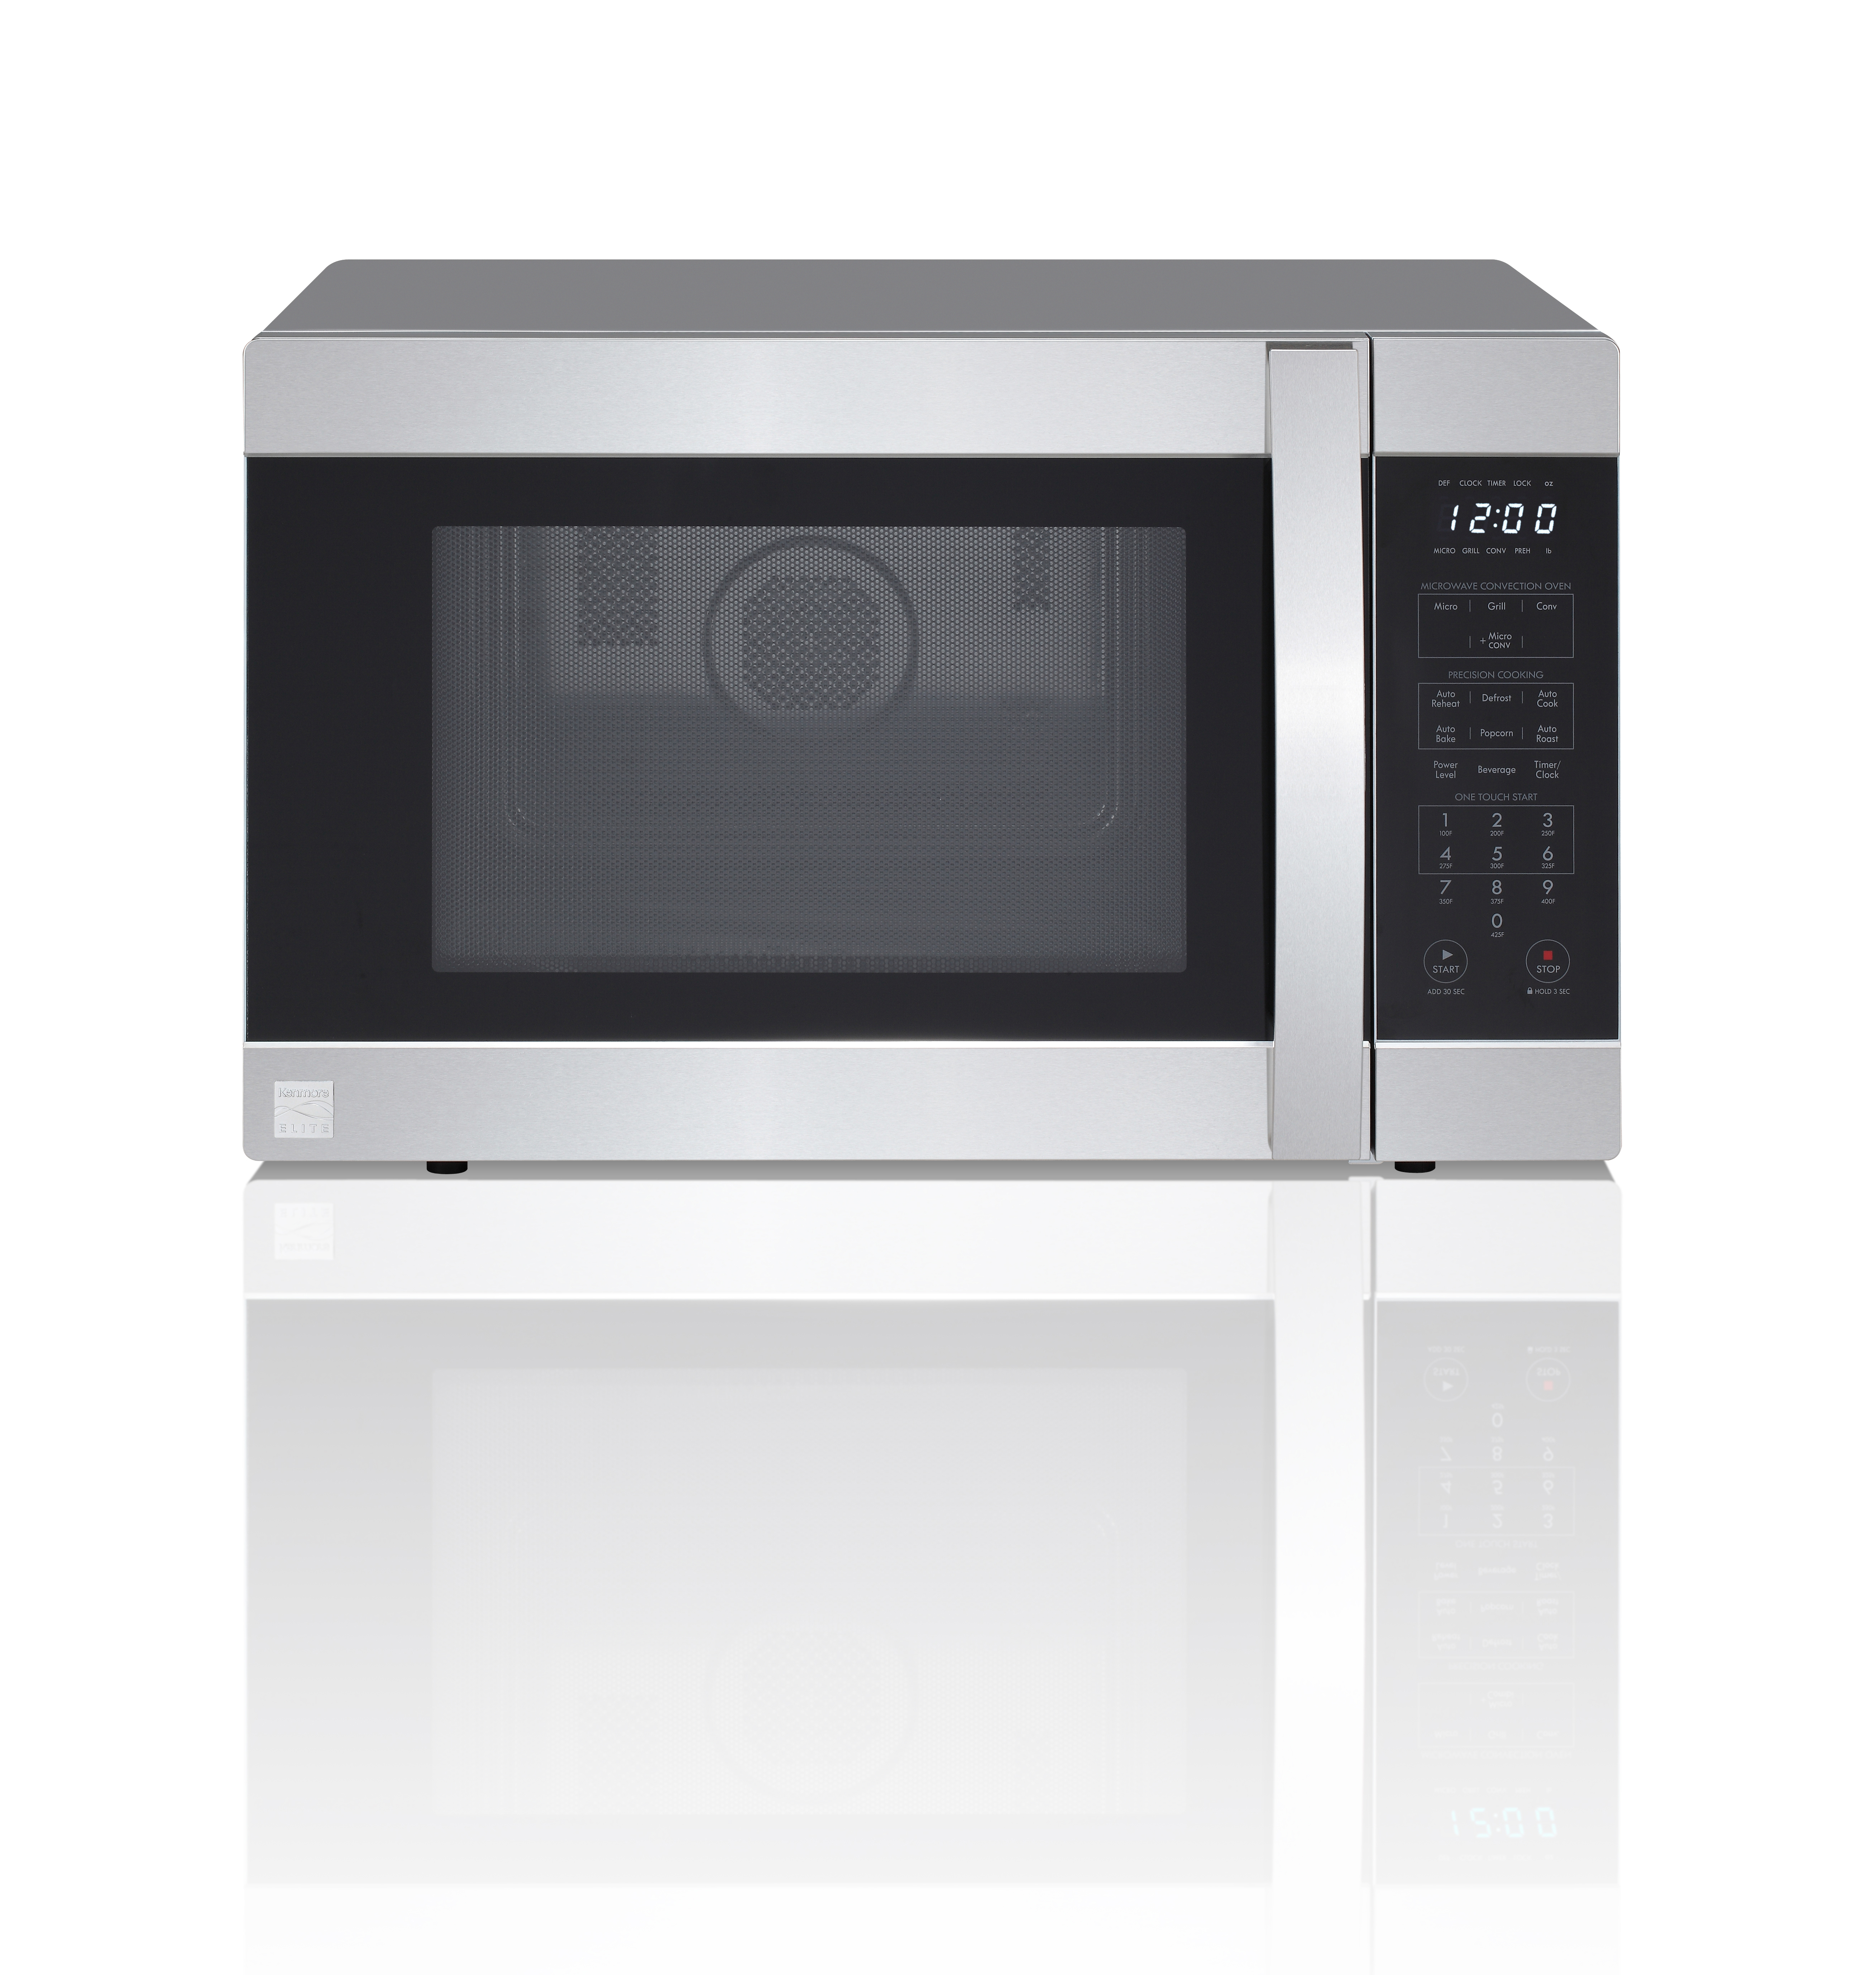 microwave convection oven reviews 2018